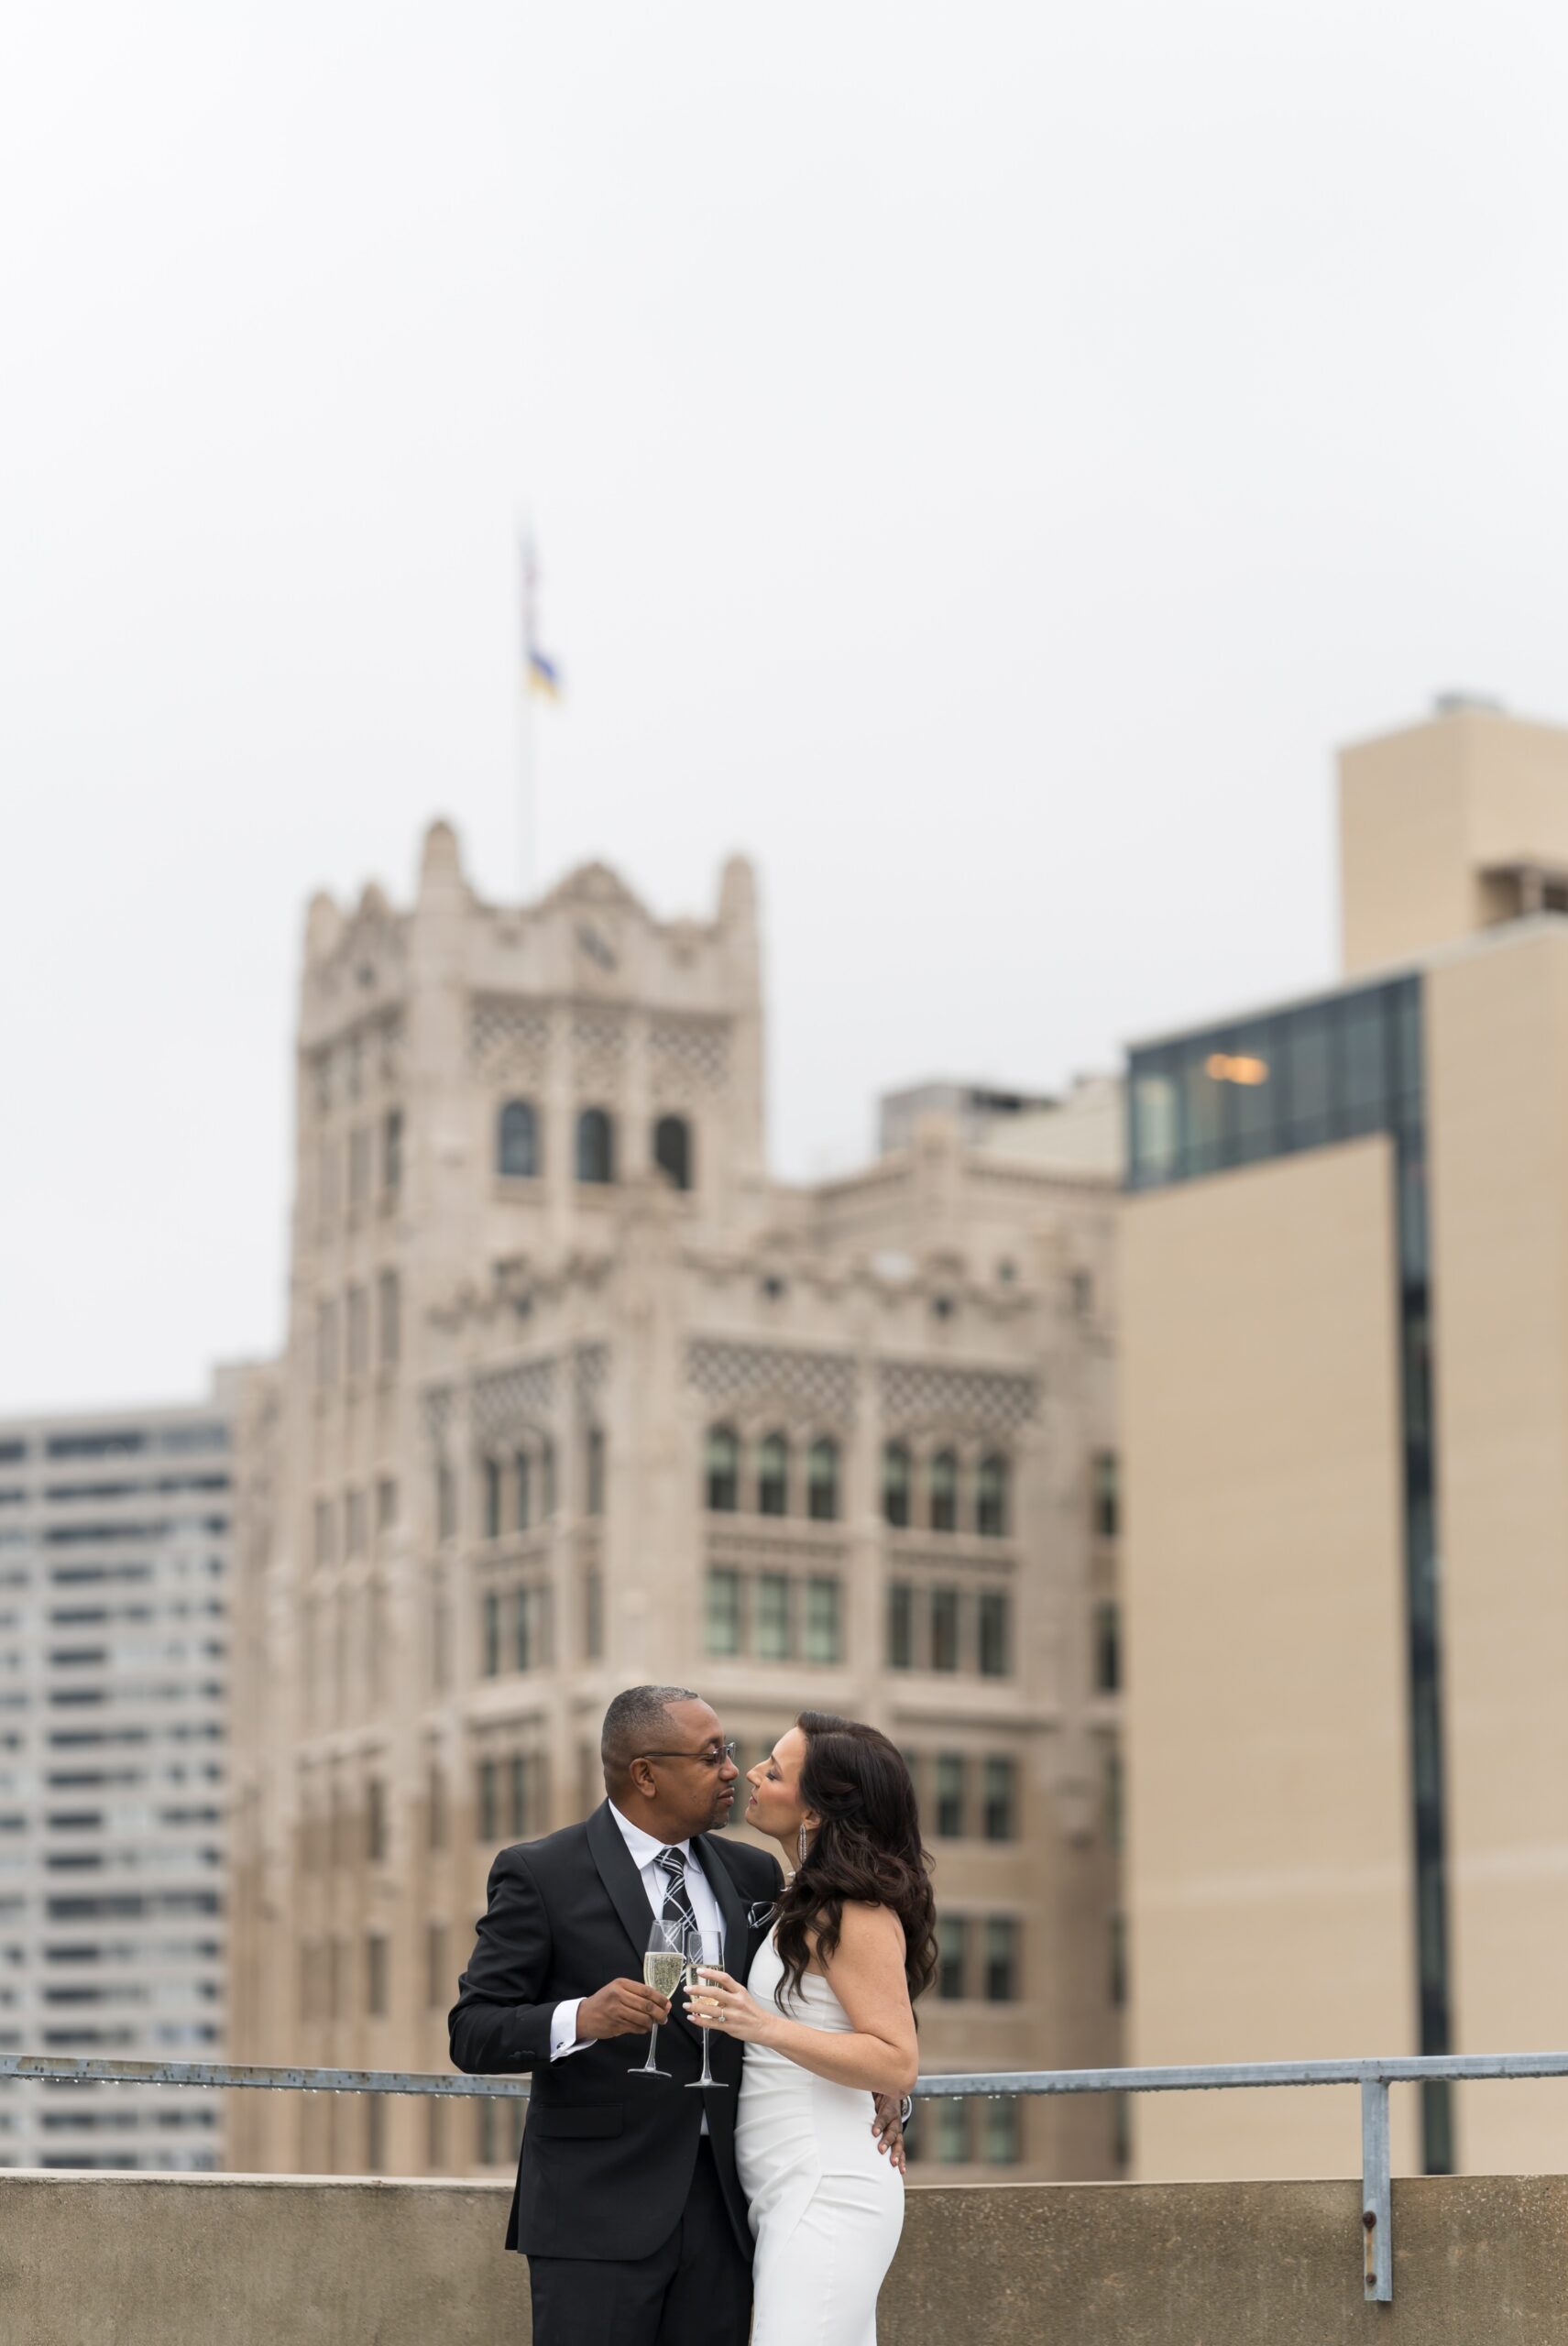 A bride and groom, holding champagne glasses, almost kiss with Detroit skyscrapers behind them on their wedding day.  